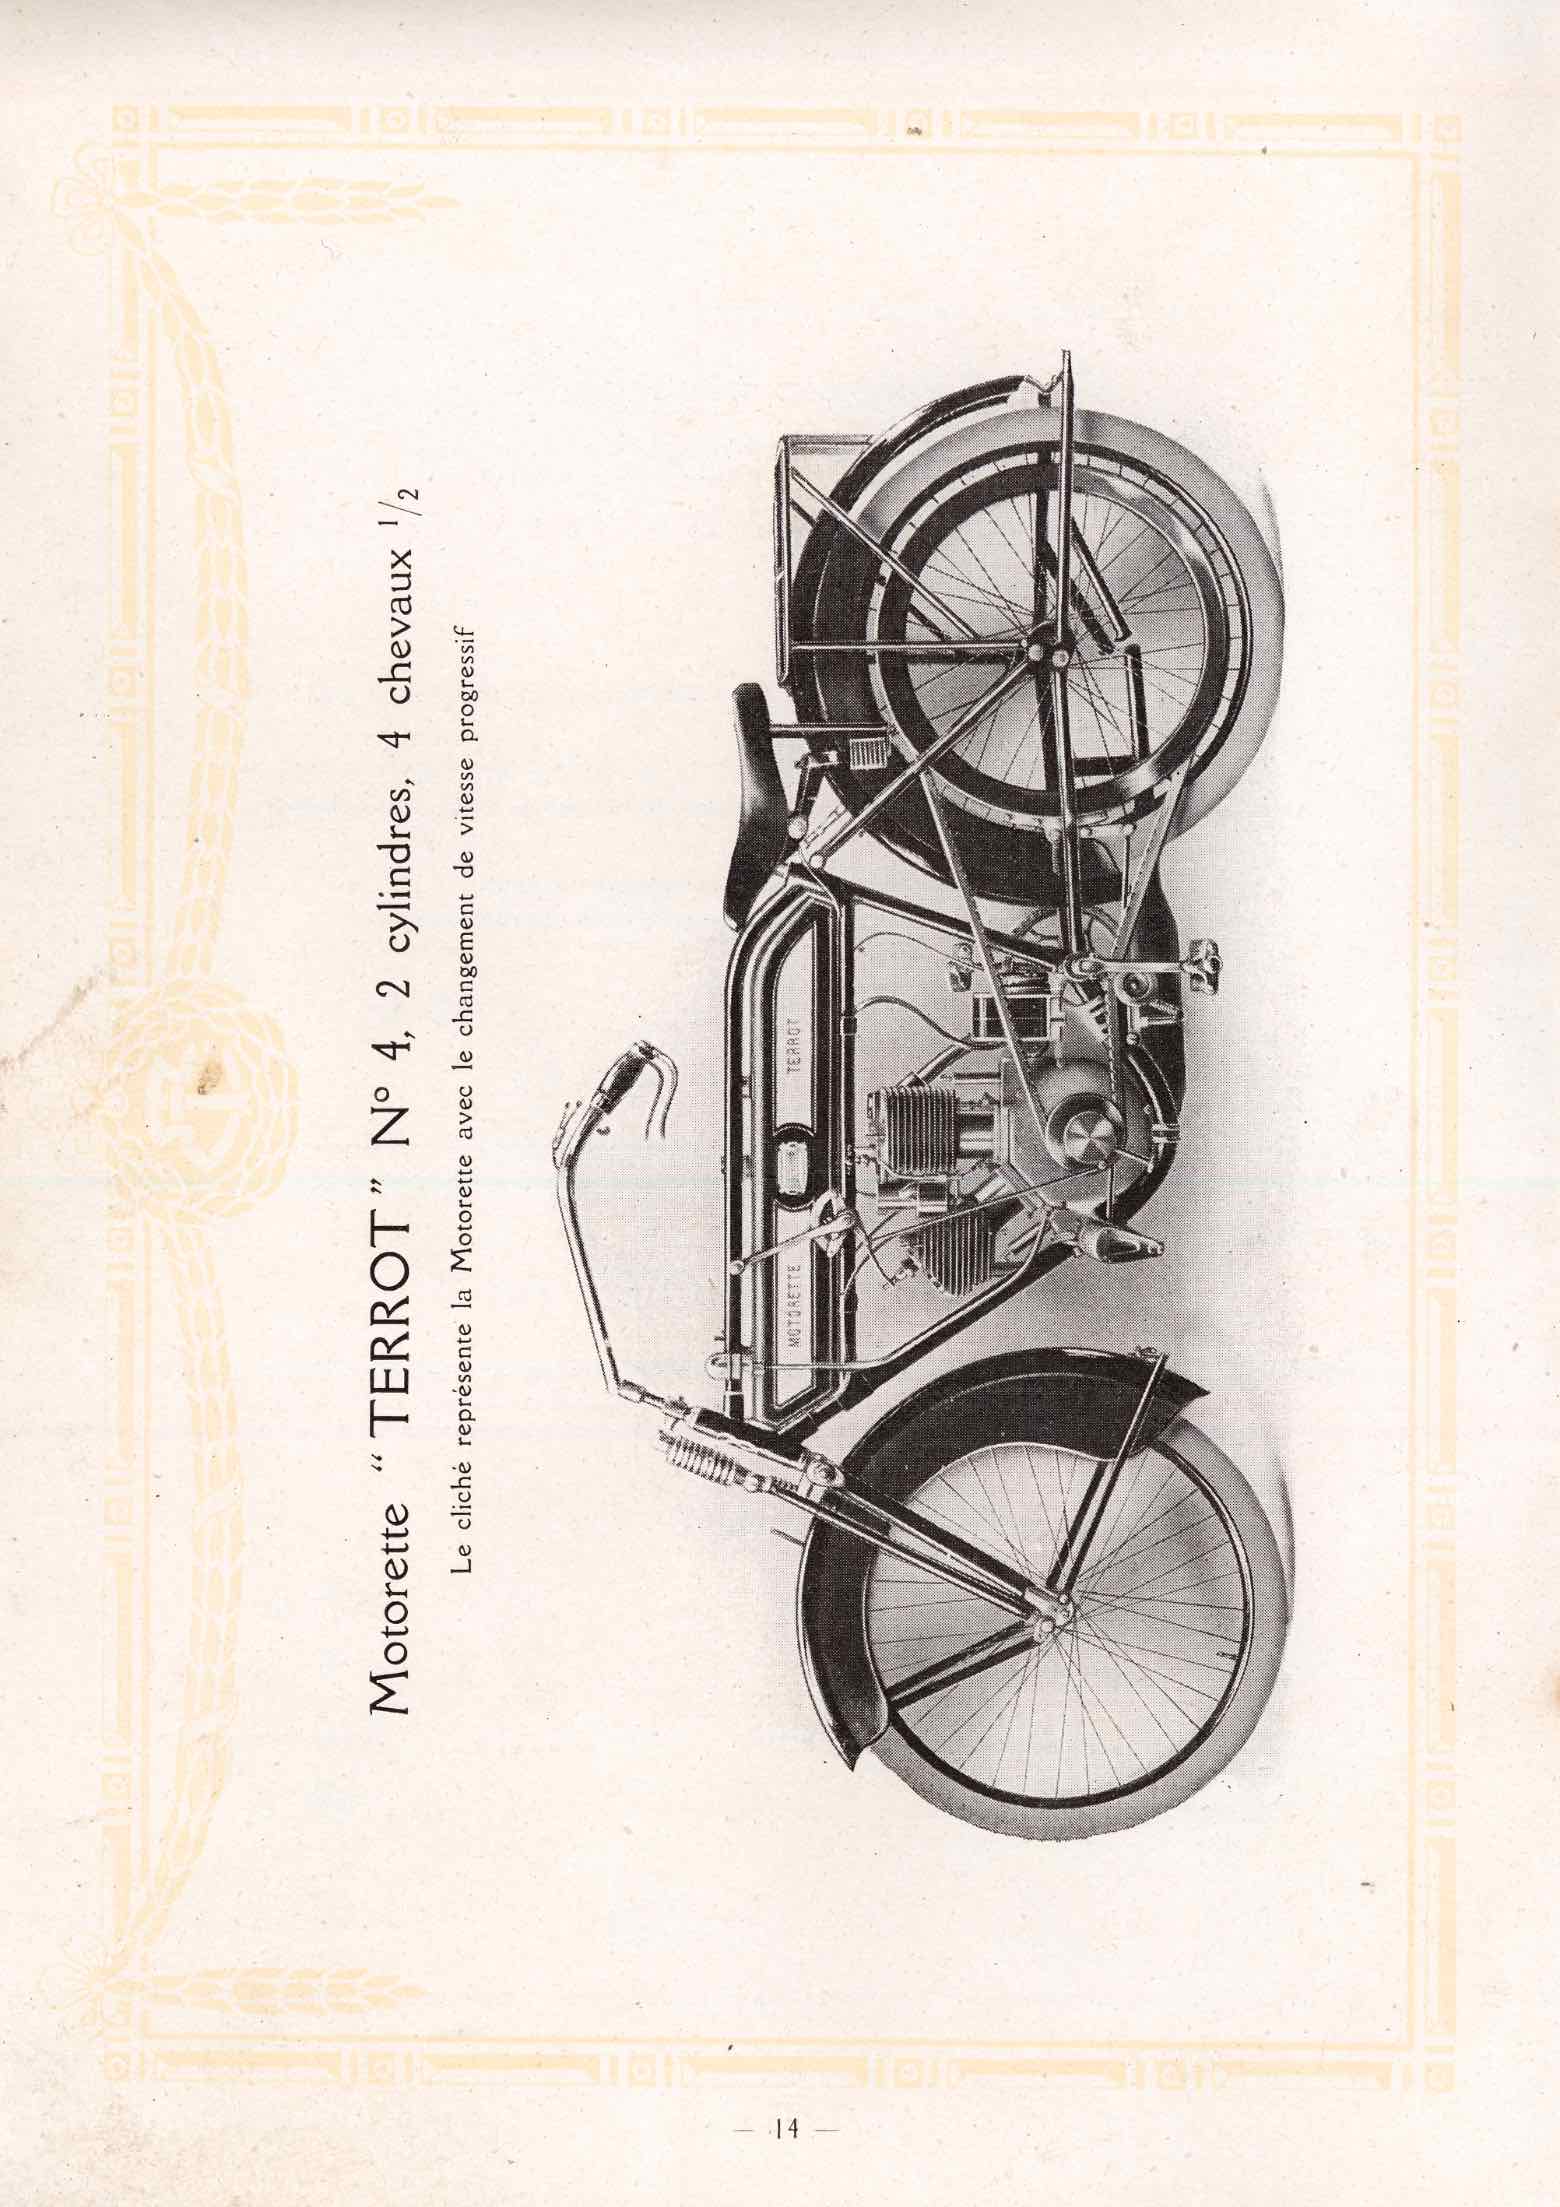 Terrot & Cie - Cycles Motorcyclettes Voiturettes 1914 page 14 main image